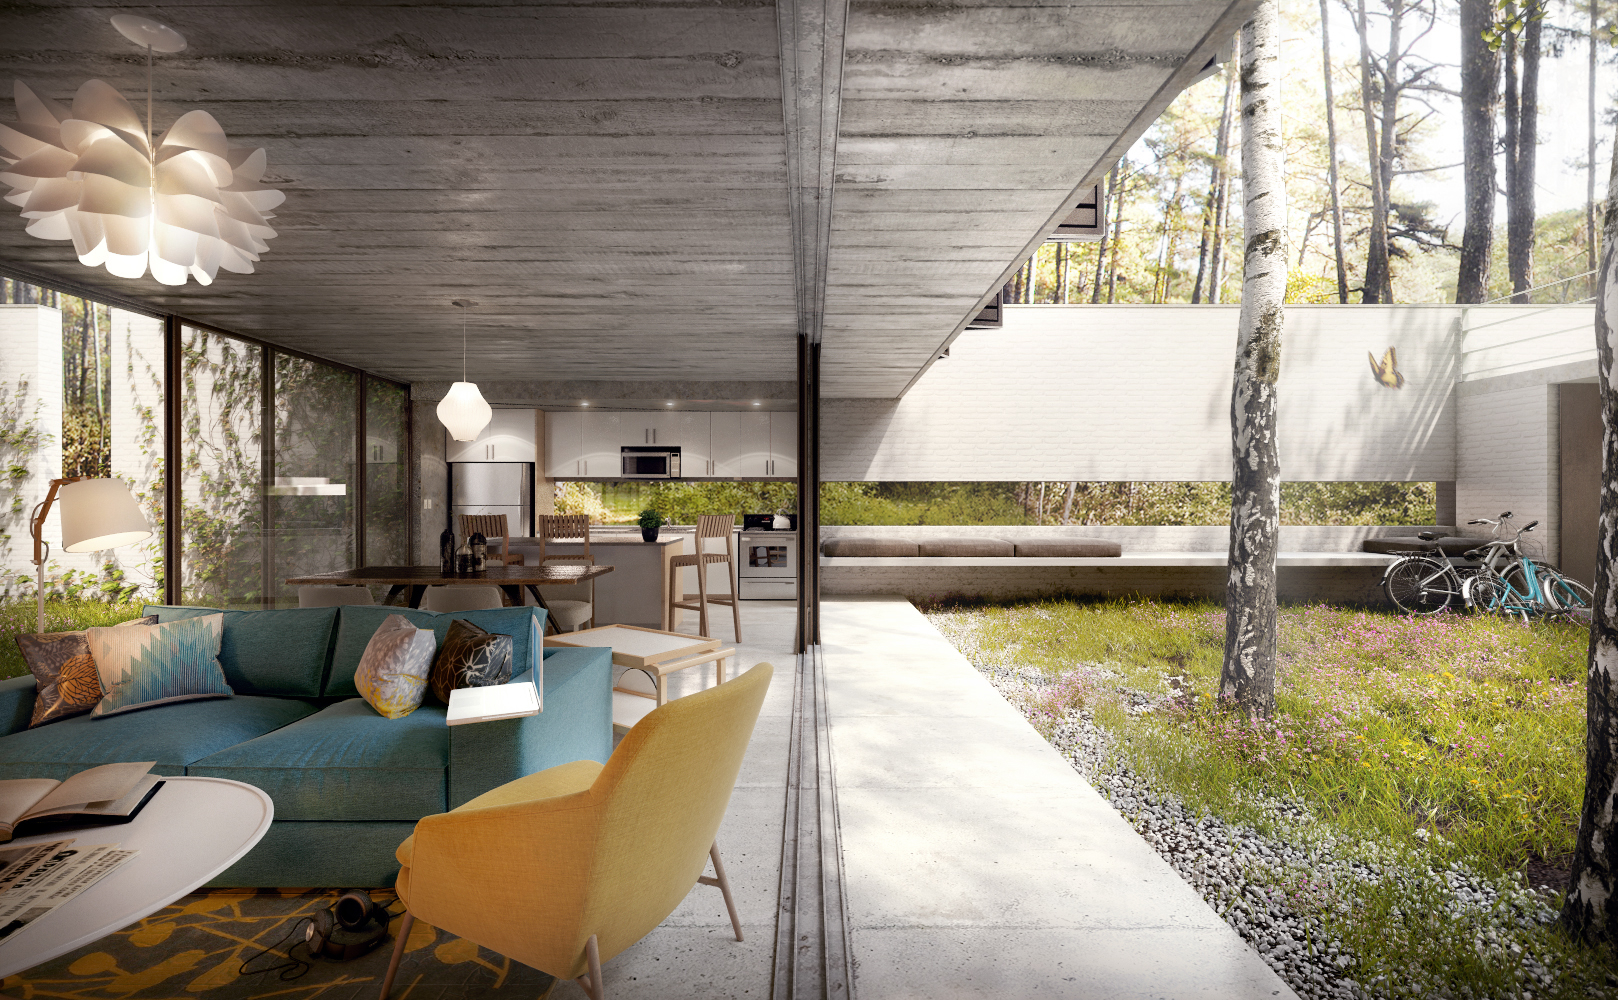 d photoshop ds max vray open space house in the woods acastagnet